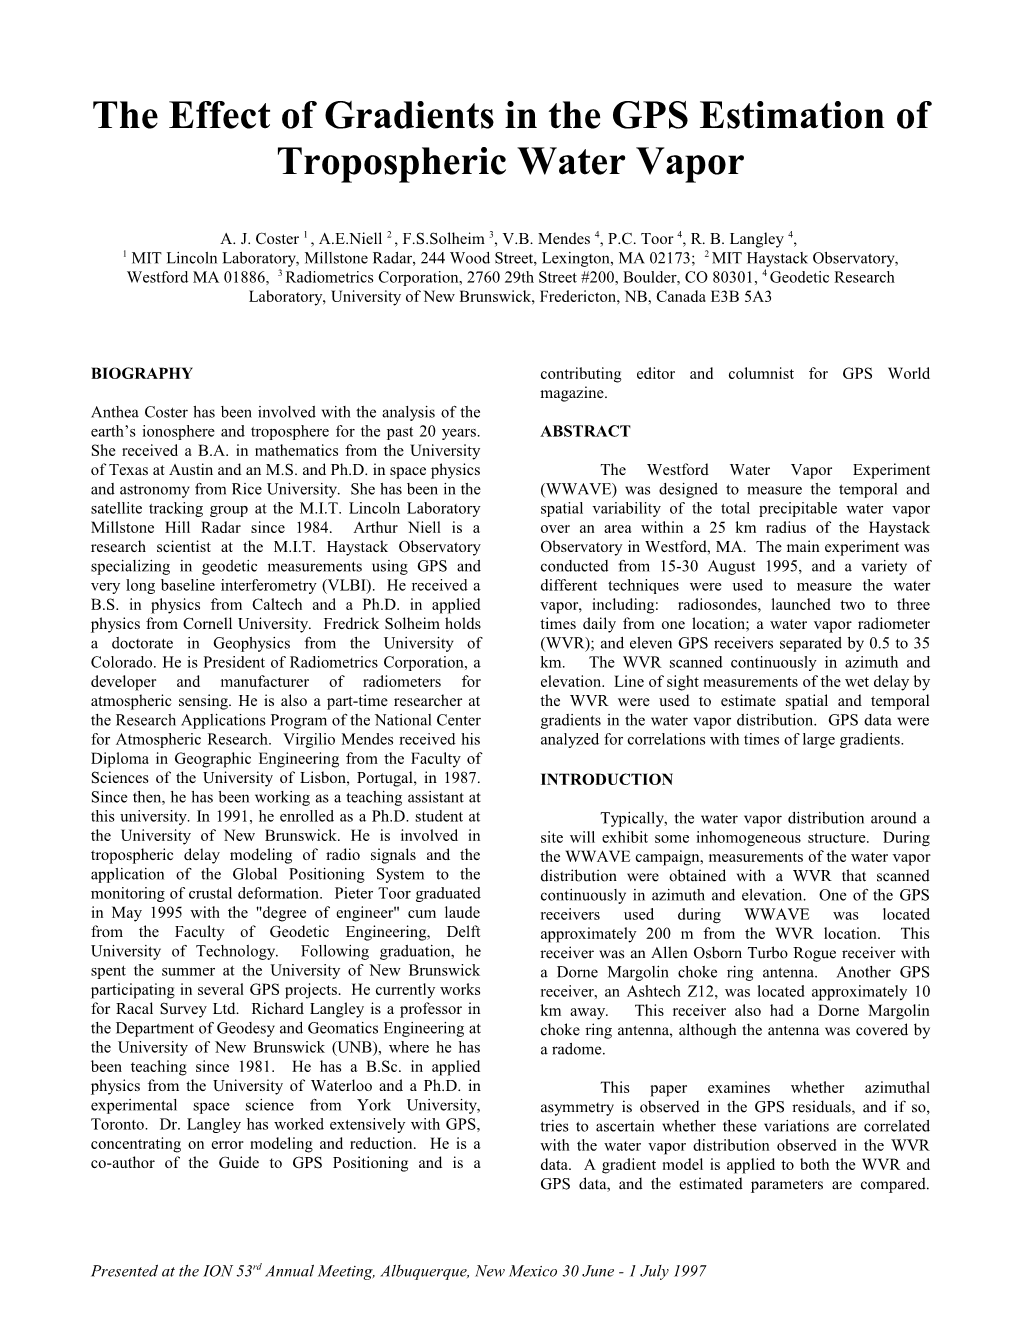 The Westford Water Vapor Experiment: Use of GPS to Determine Total Precipitable Water Vapor